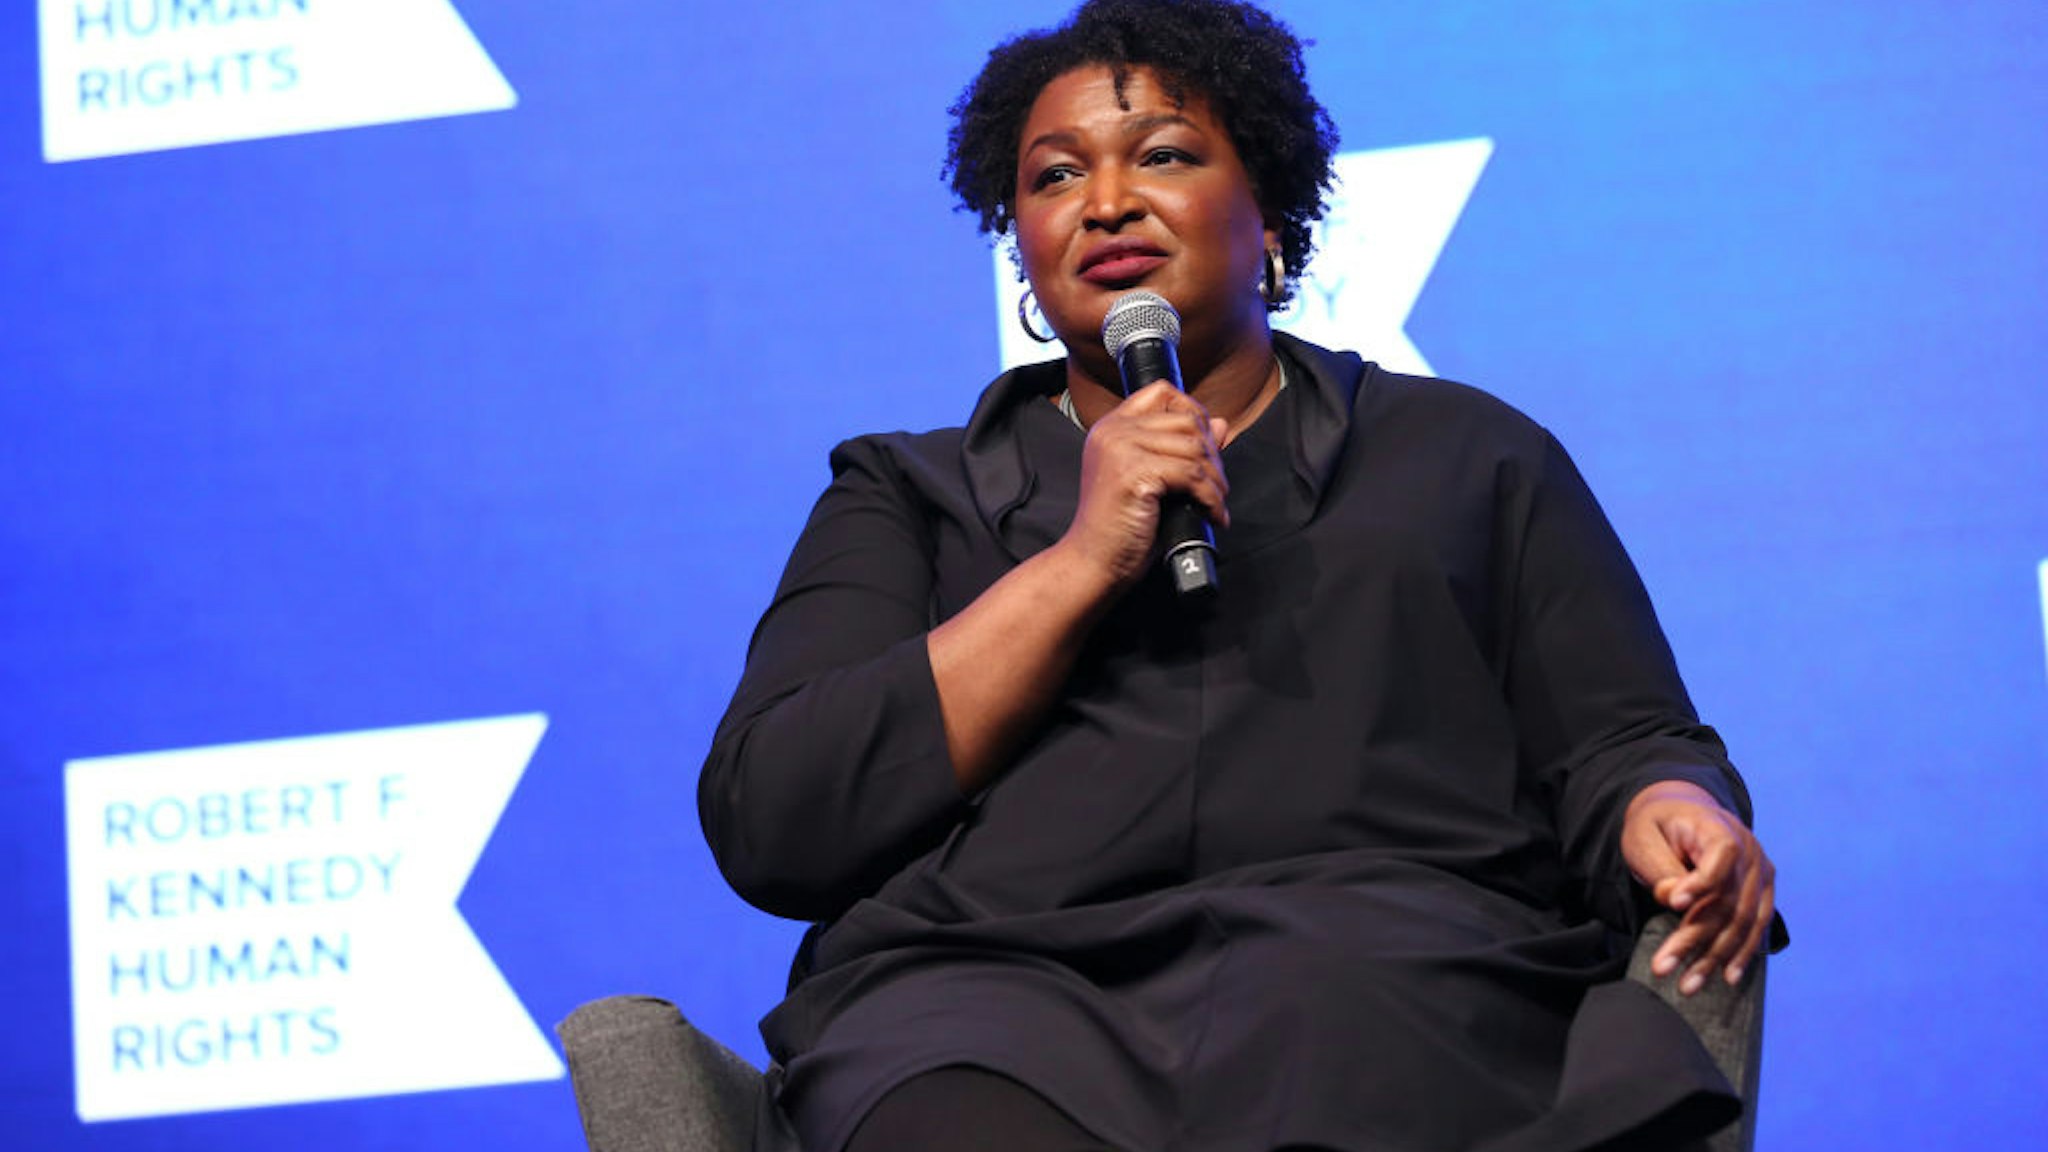 NEW YORK, NEW YORK - DECEMBER 09: Stacey Abrams speaks onstage during the 2021 Robert F. Kennedy Human Rights Ripple of Hope Award Gala on December 09, 2021 in New York City. (Photo by Monica Schipper/Getty Images for Robert F. Kennedy Human Rights)